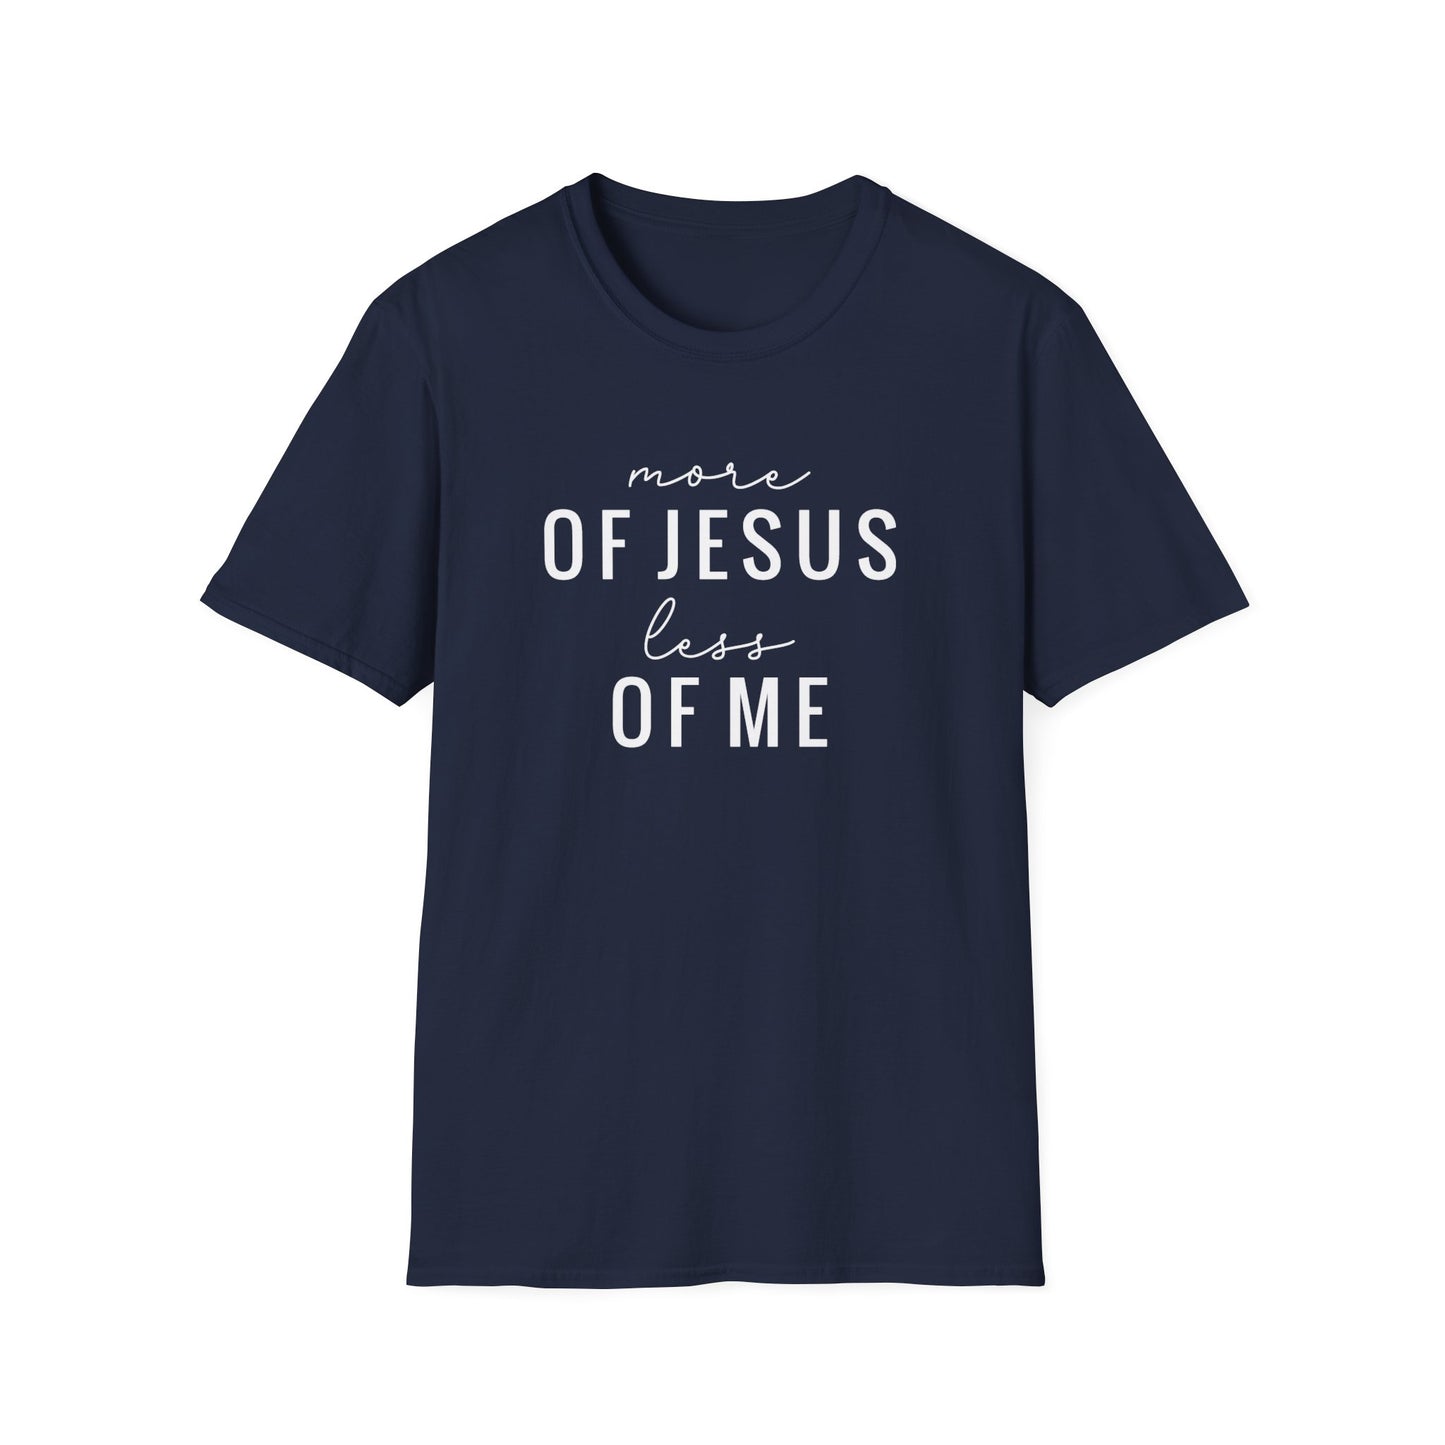 More of Jesus Less of Me Unisex Softstyle T-Shirt